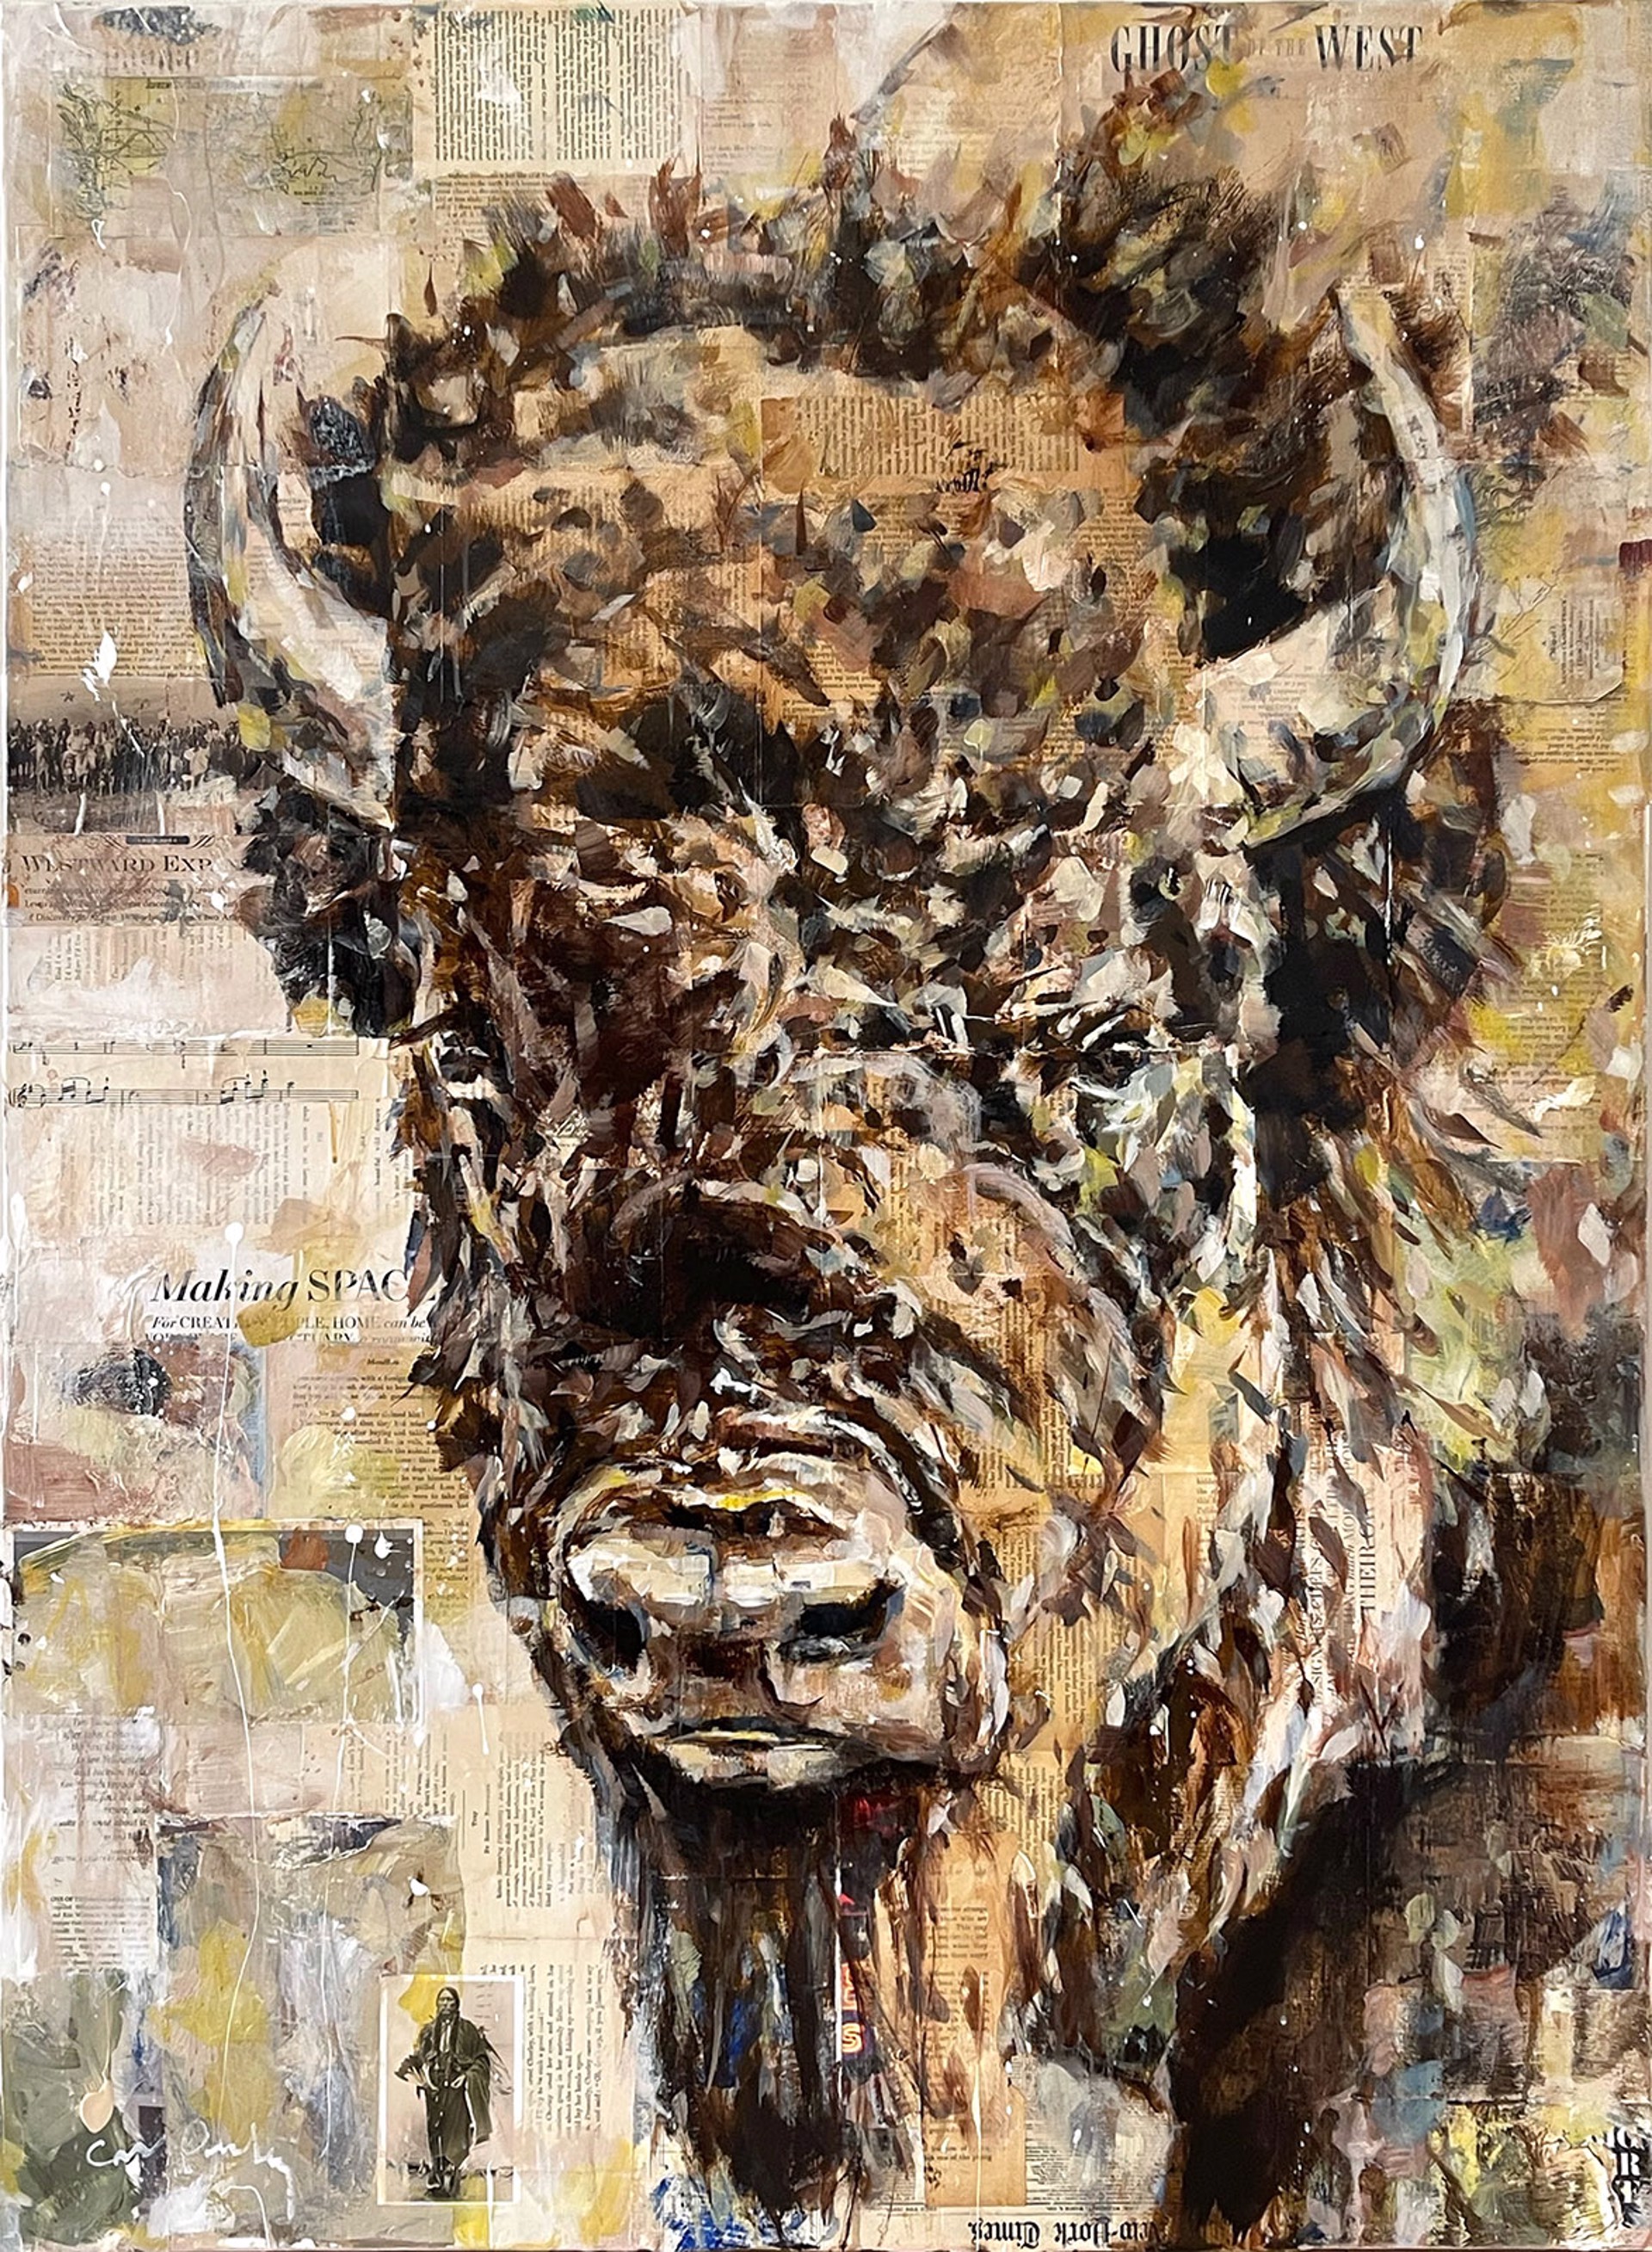 Original Mixed Media Painting By Carrie Penley Featuring A Bison Head Facing Forward With Vintage Collage Details